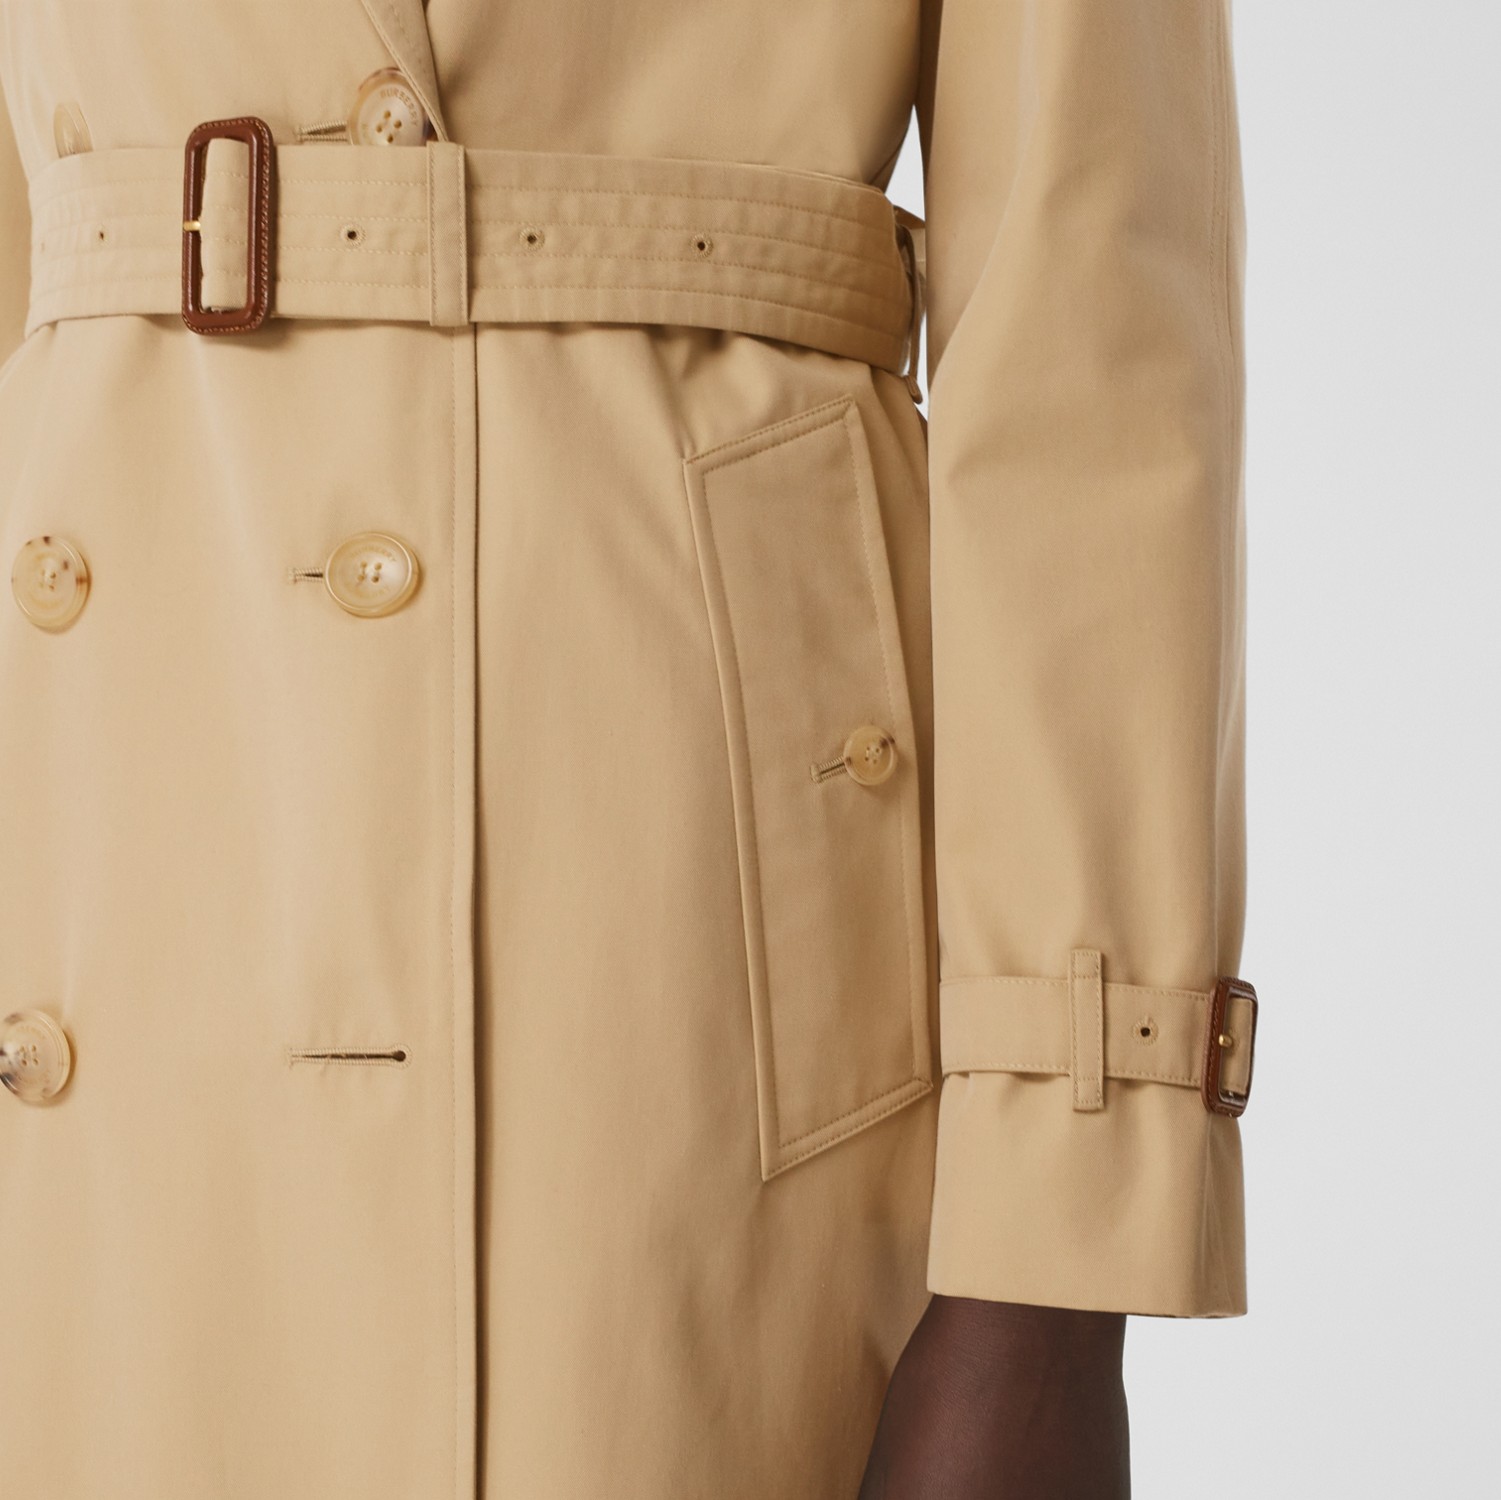 The Waterloo - Trench coat Heritage longo (Mel) - Mulheres | Burberry® oficial